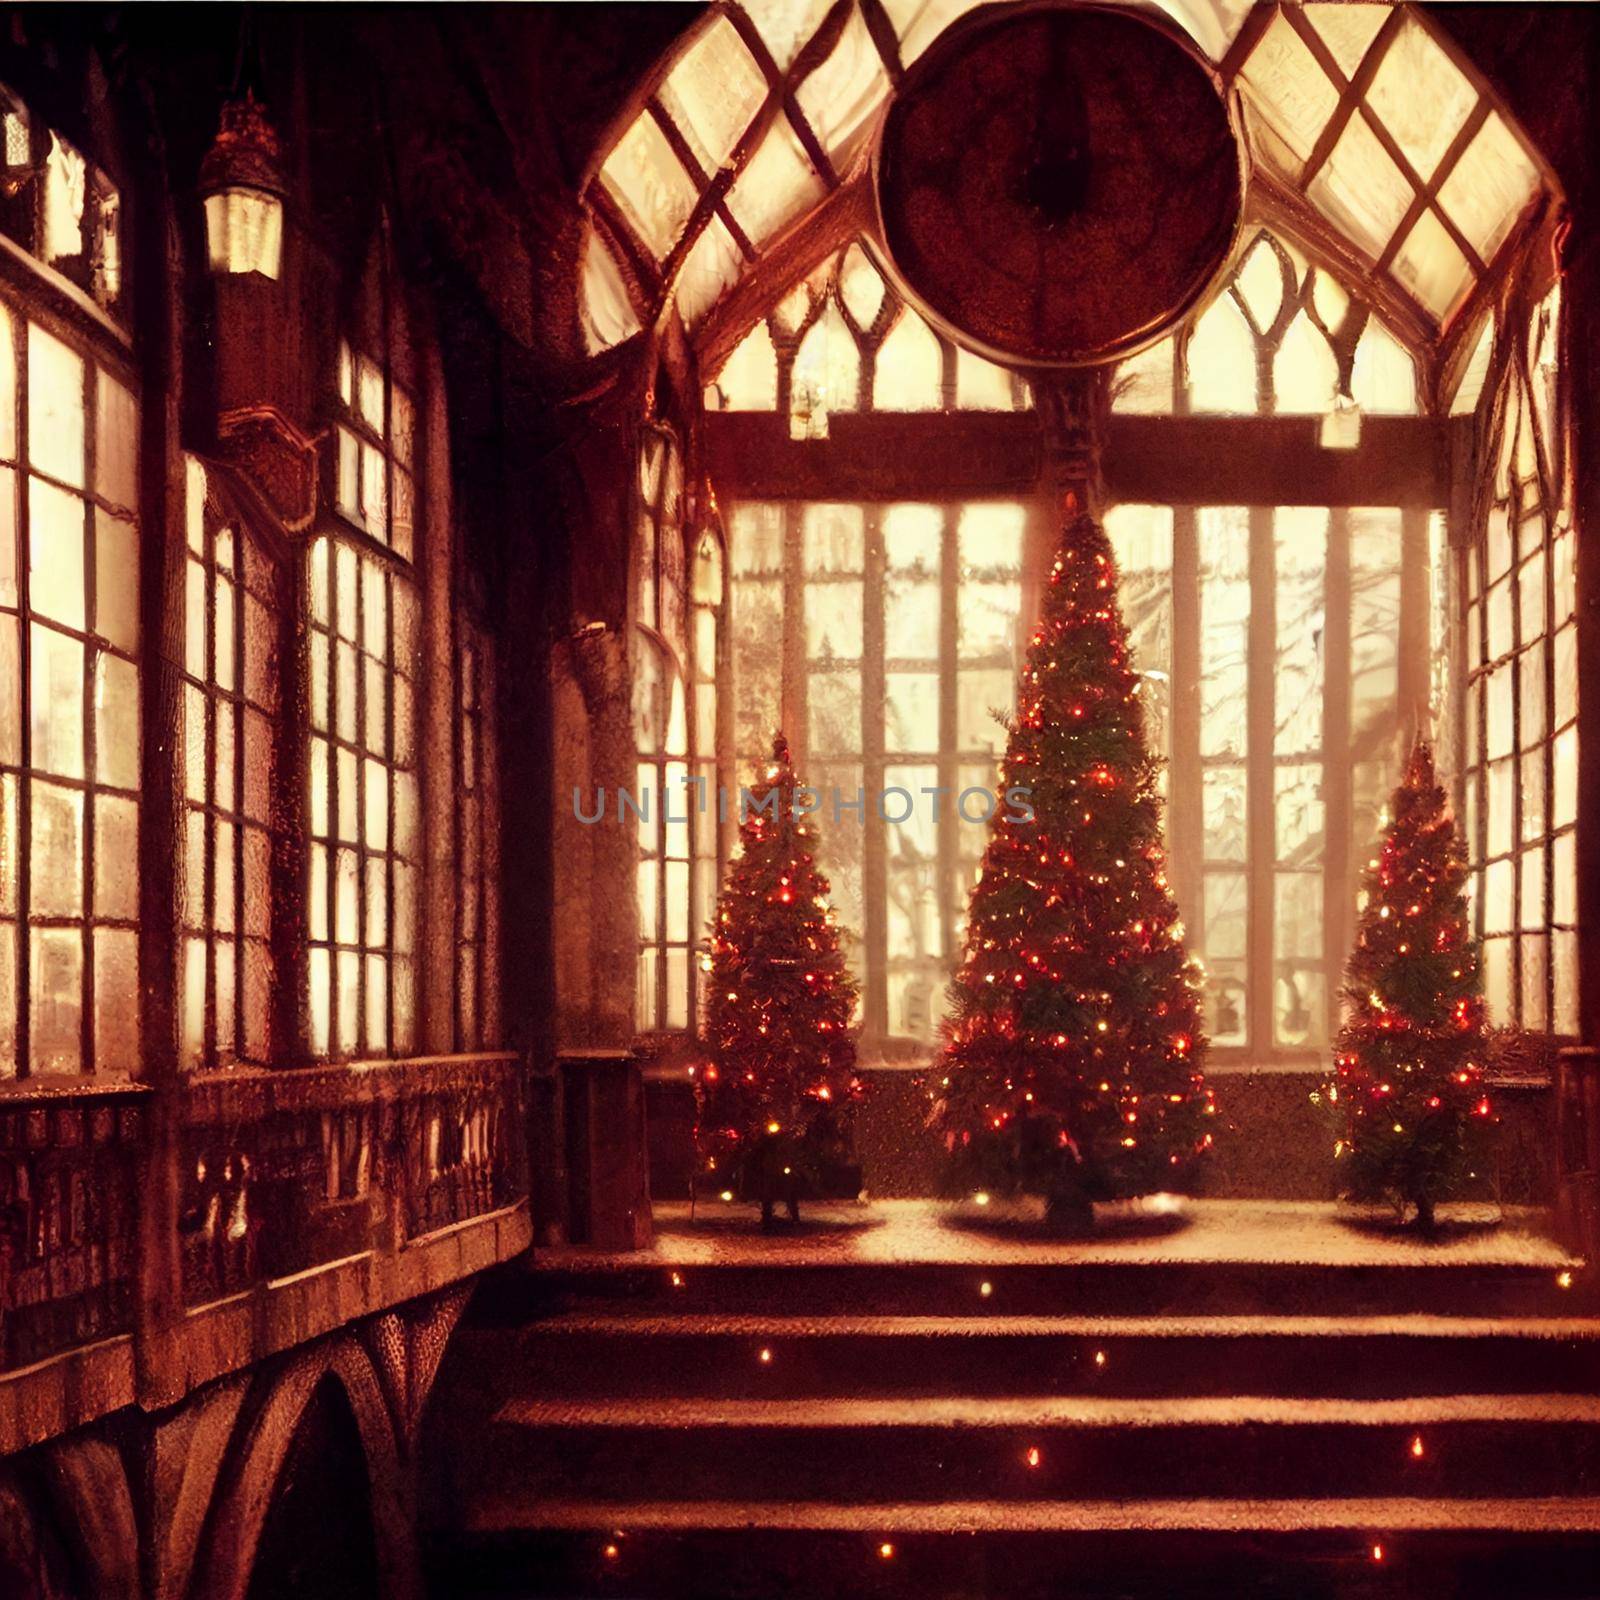 Castle halls decorated for Christmas by NeuroSky